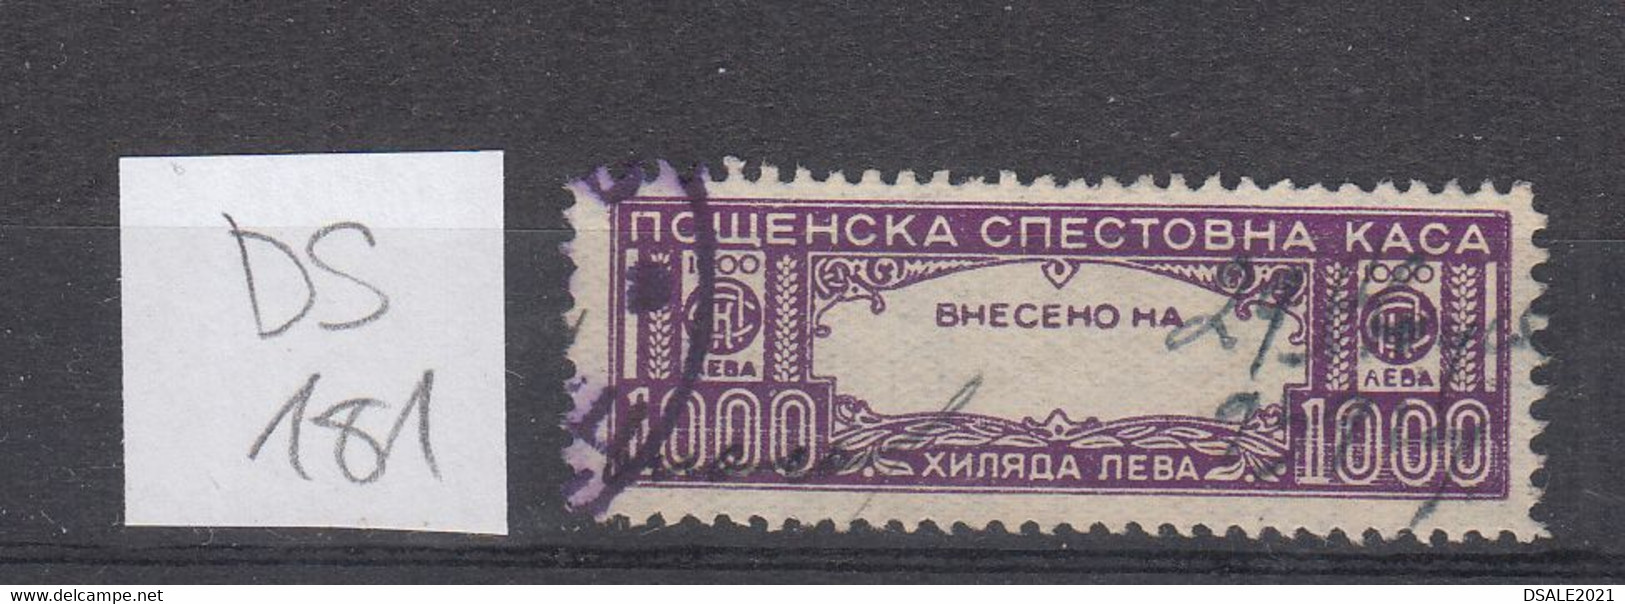 Bulgaria Bulgarie Bulgarije 1930s/40s Postal Savings Bank Contribution Fee 1000Lv. Fiscal Revenue Stamp (ds181) - Official Stamps